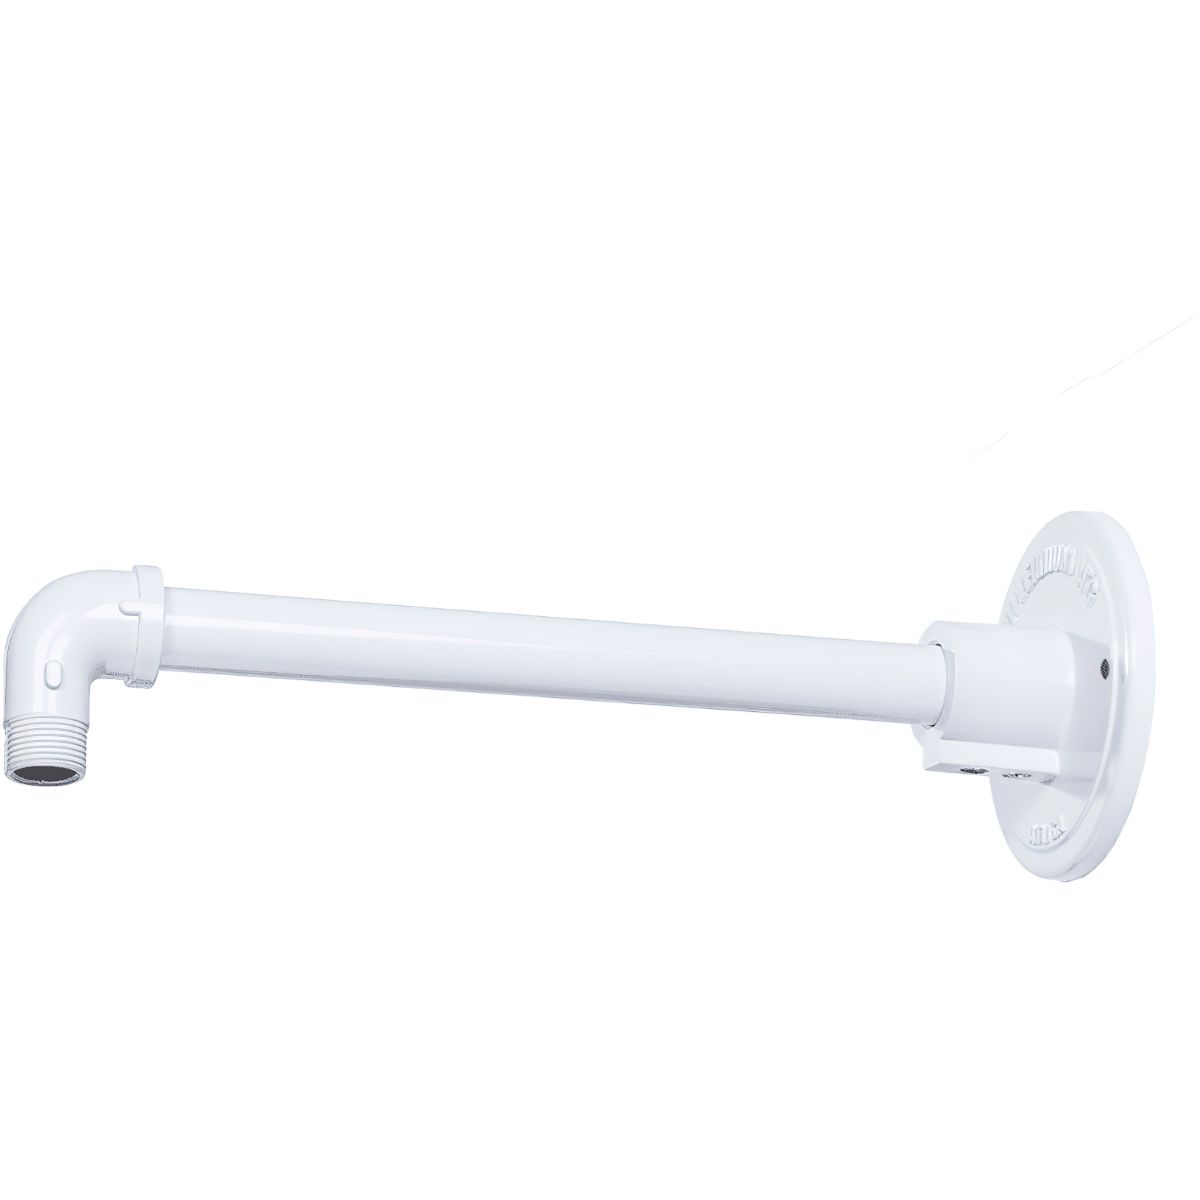 R Series 13 in. Goose Neck for Wall Mount - Bees Lighting